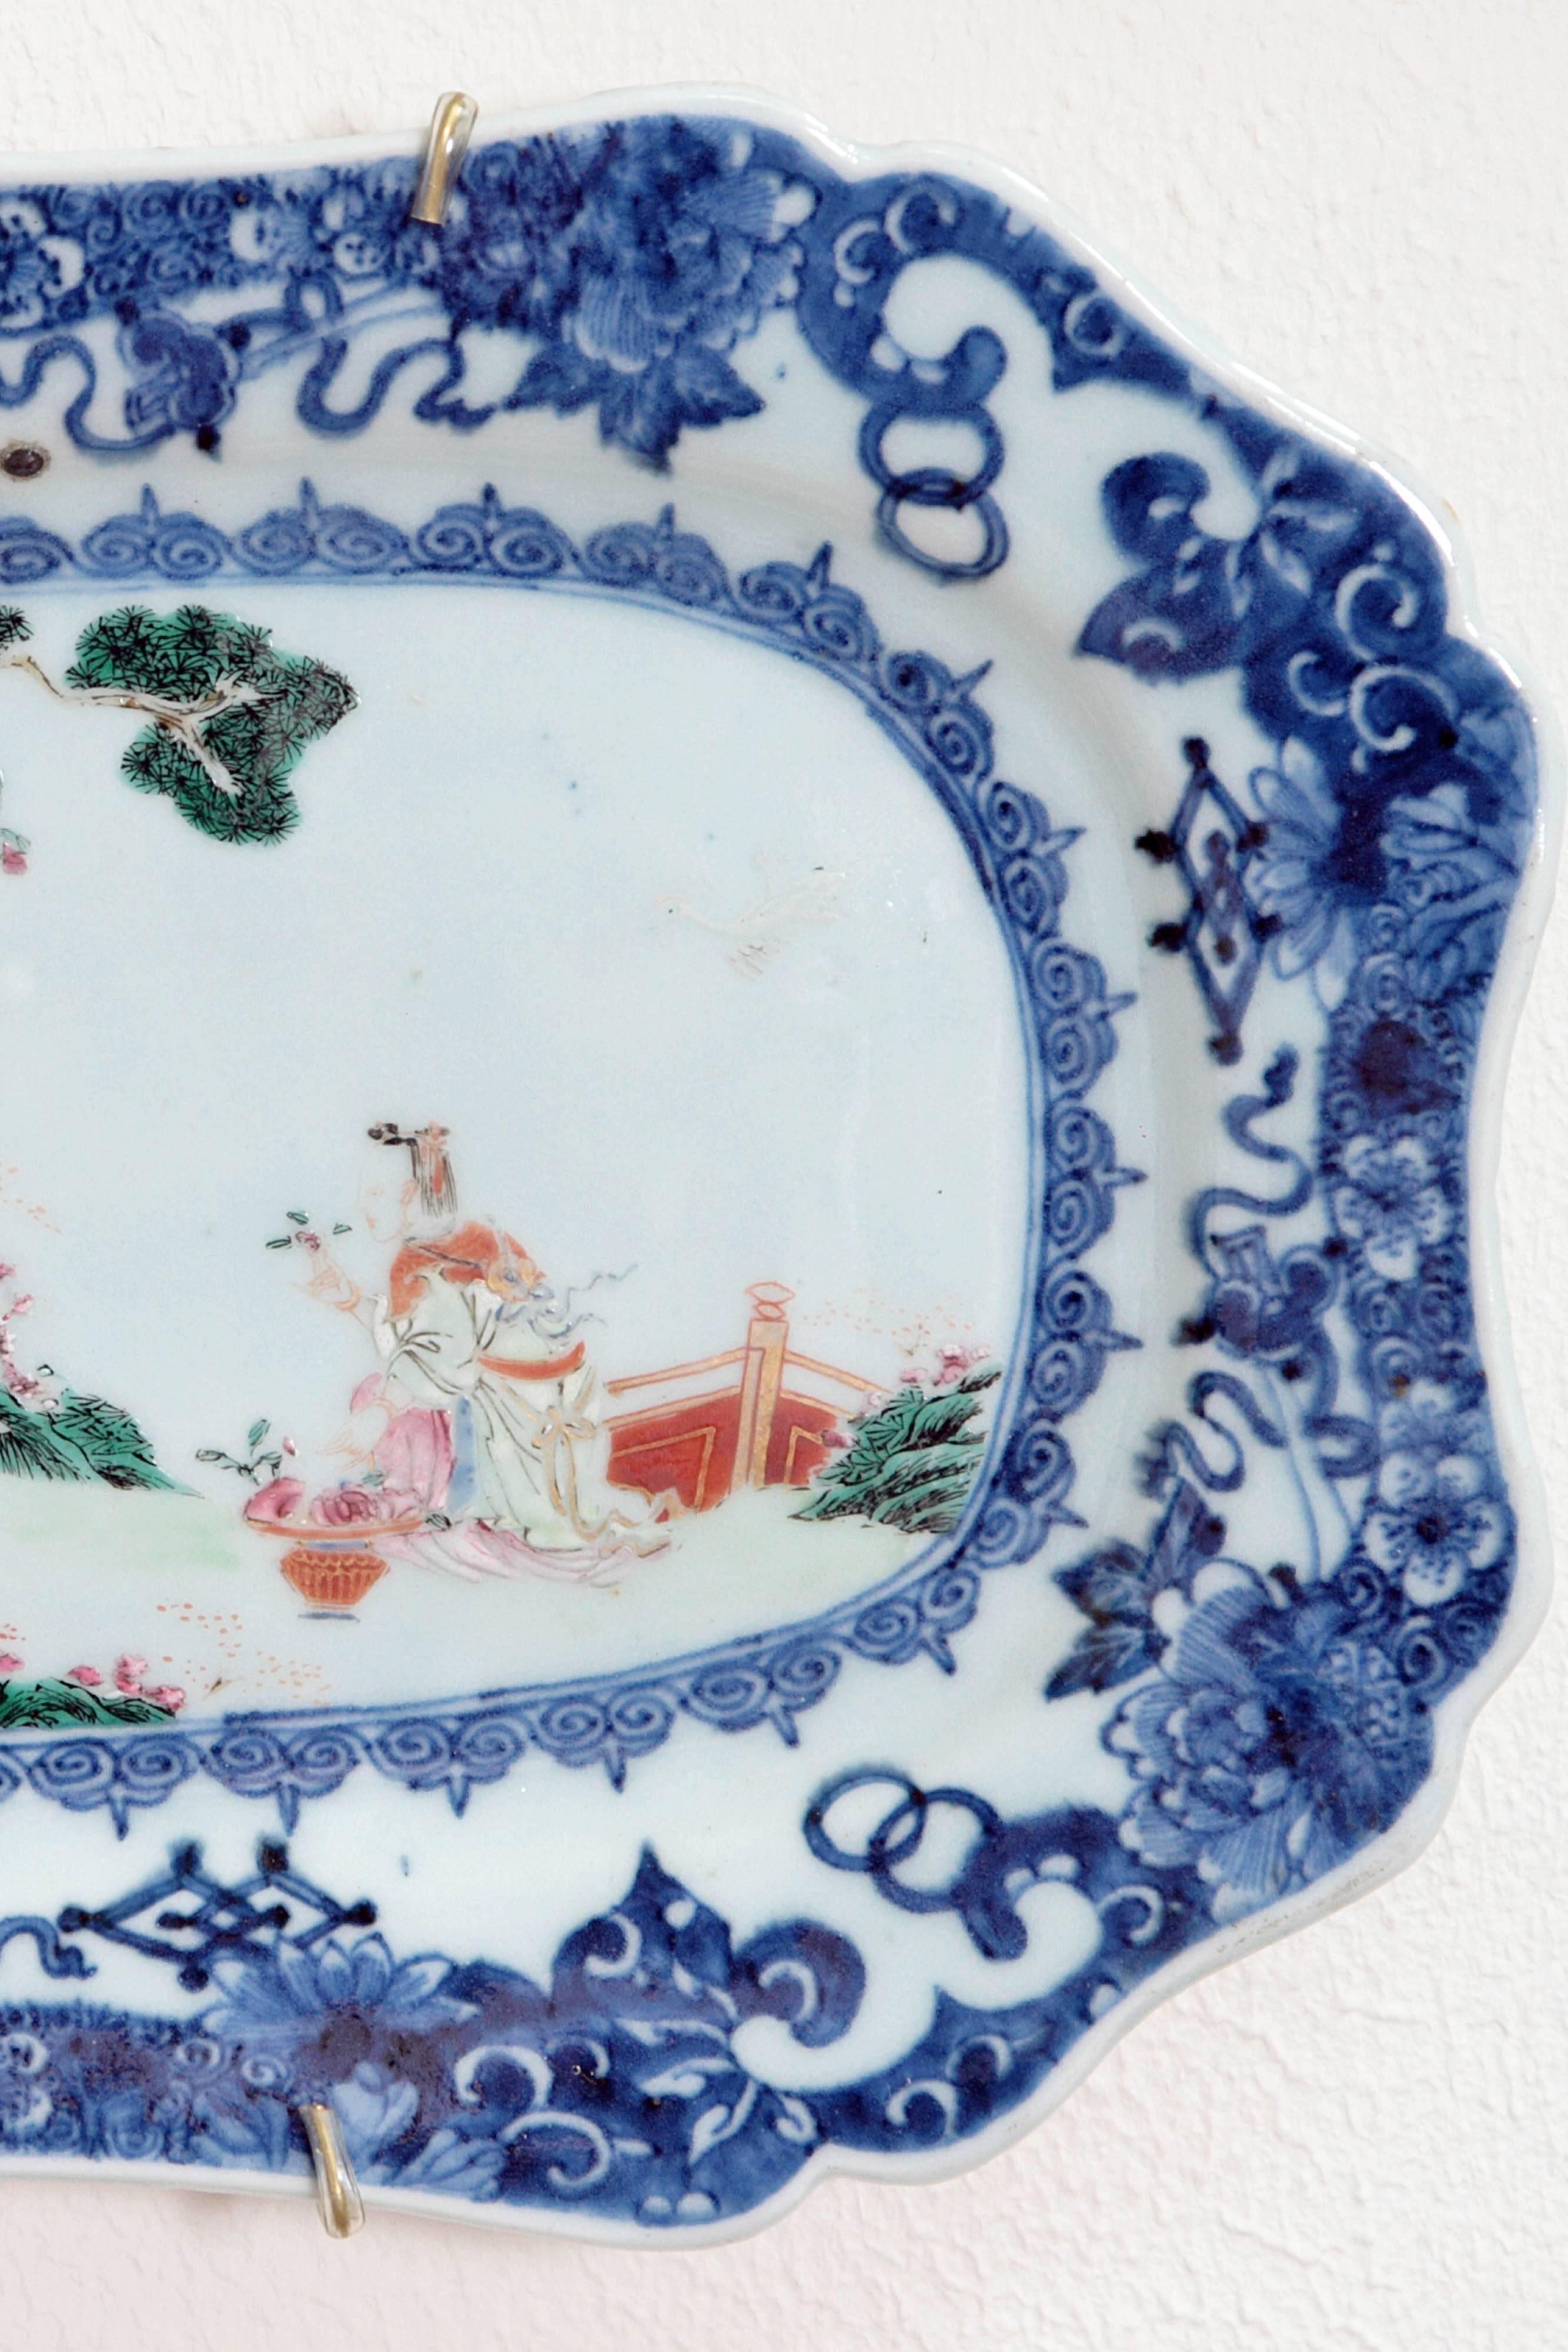 A mid-18th century group of four hand-painted porcelain platters, Chinese Export, octagonal form with foliate blue border, central scene depicts a pair of Chinese beauties with flower baskets, one carried over the shoulder on a long slender pole, in